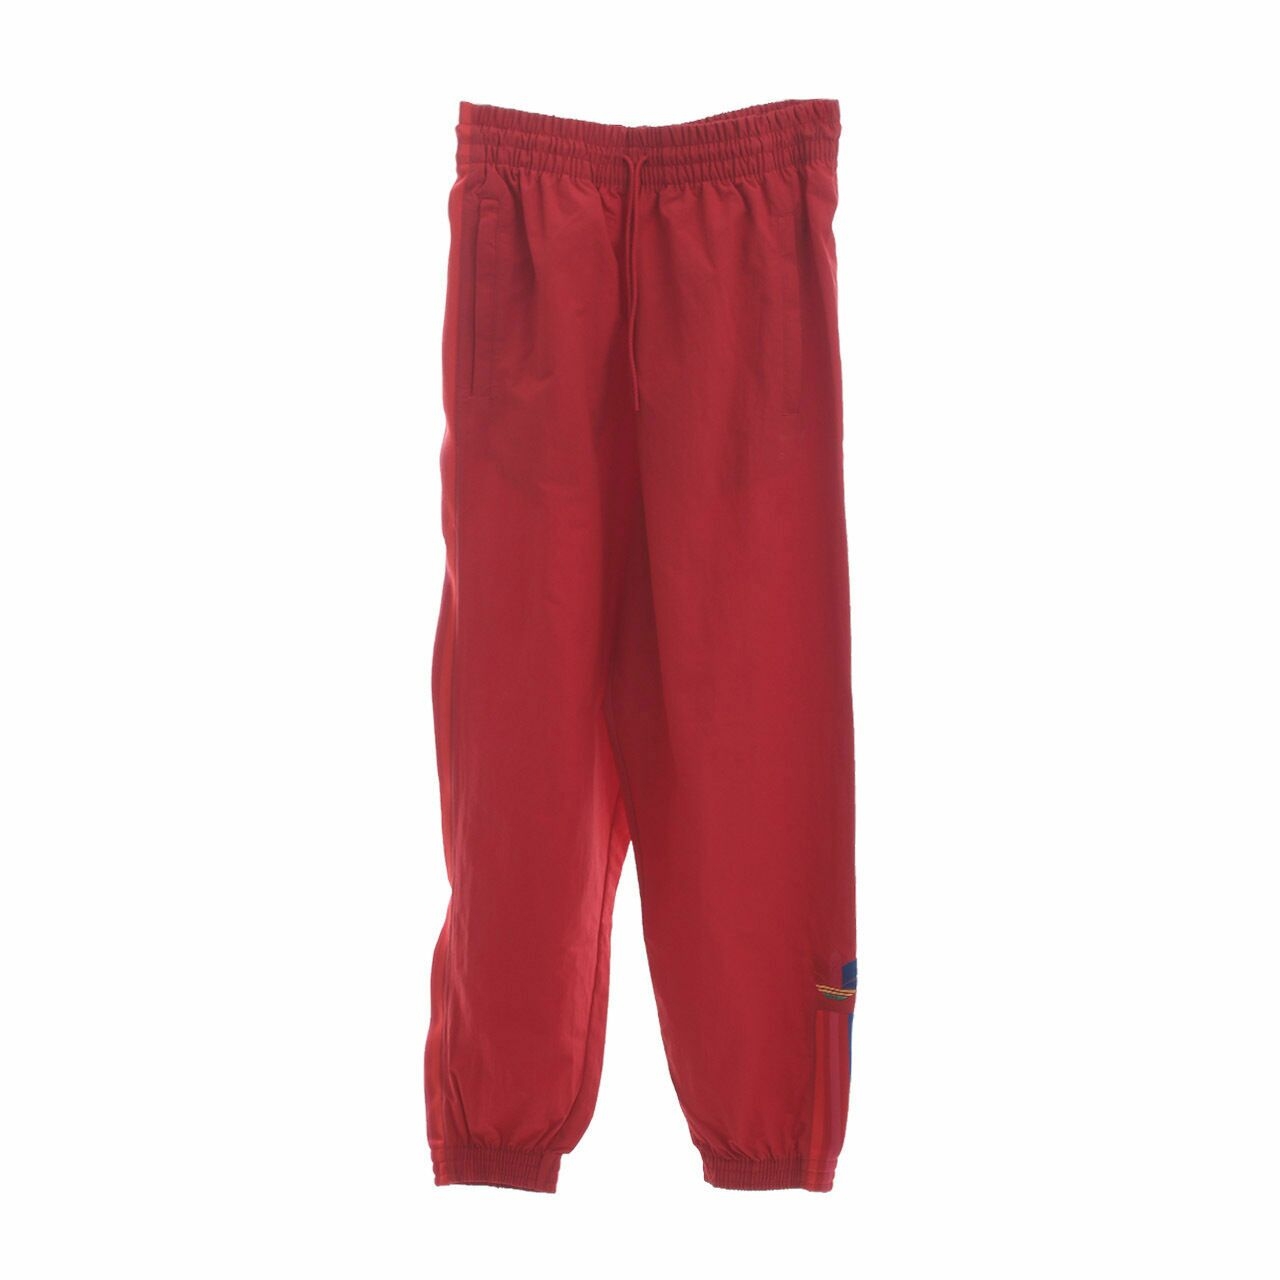 Adidas Red Track Long Pants